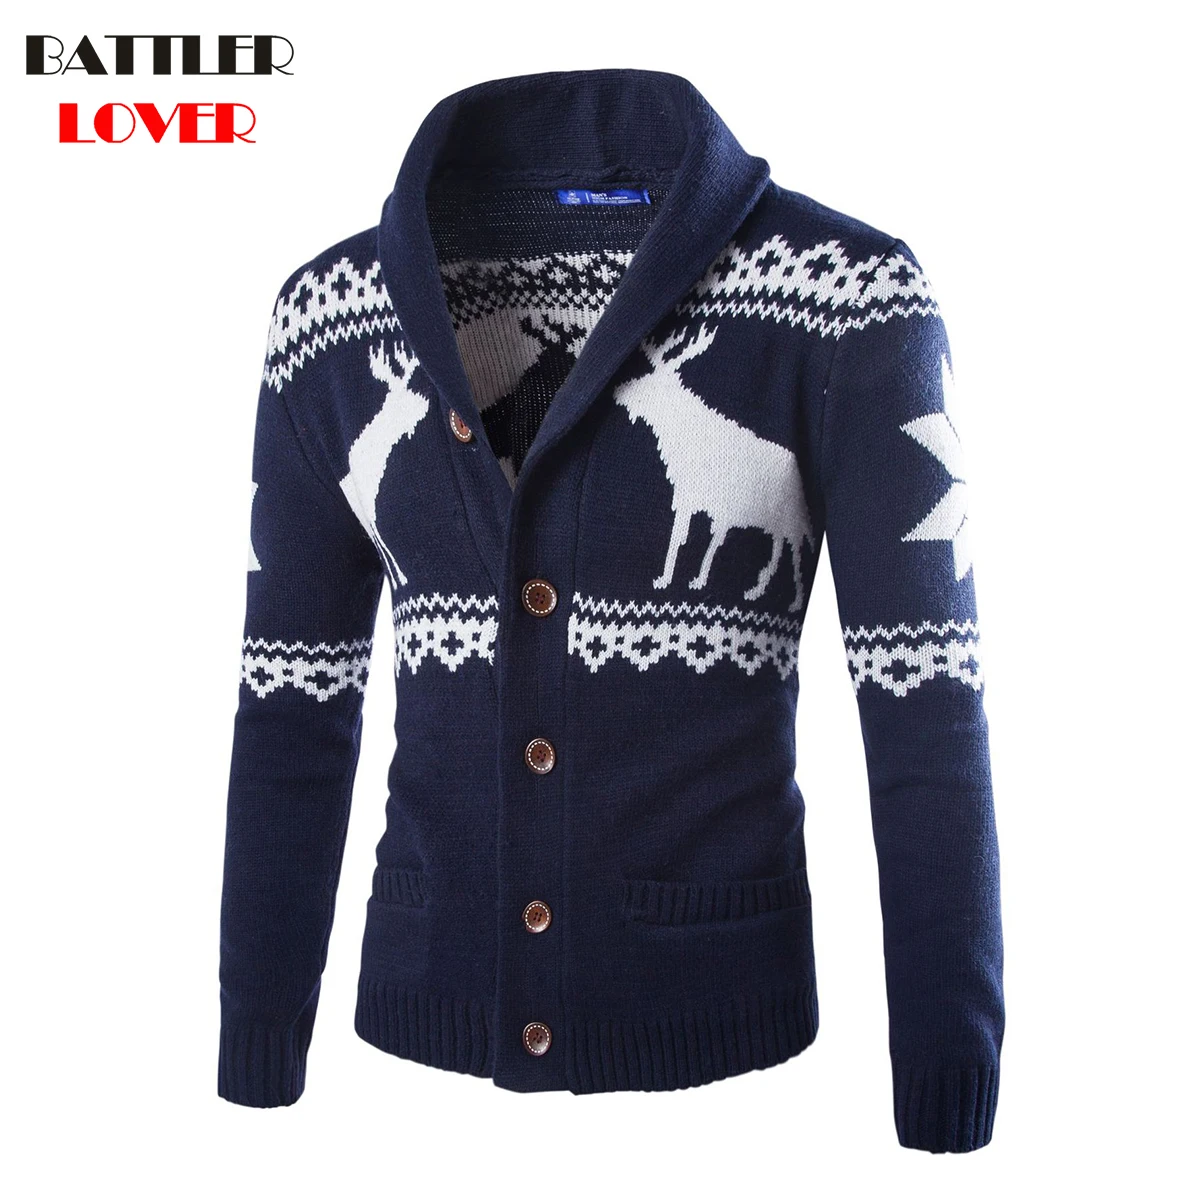 Mens Sweaters Christmas Deer Men Winter Thick Warm Clothes Casual Jacket Coat Jumper Autumn Men Outwear Sweater 2018 Cardigans